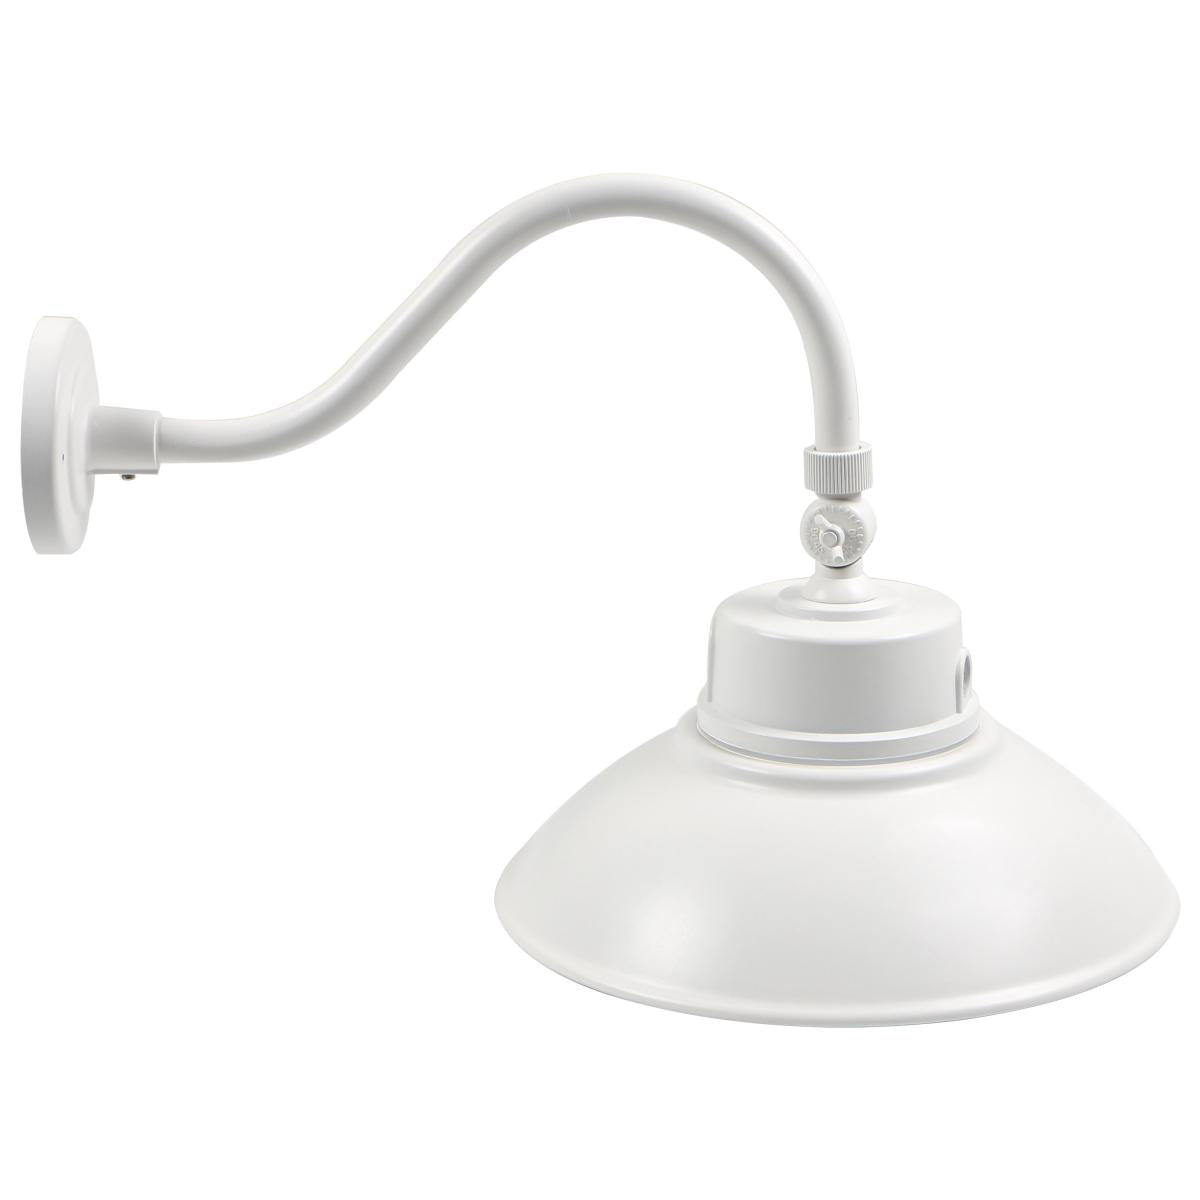 LED Gooseneck Fixture, Wattage and CCT Selectable, 5500 Lumen Max, Integrated Photocell, 120-277V, Finish White